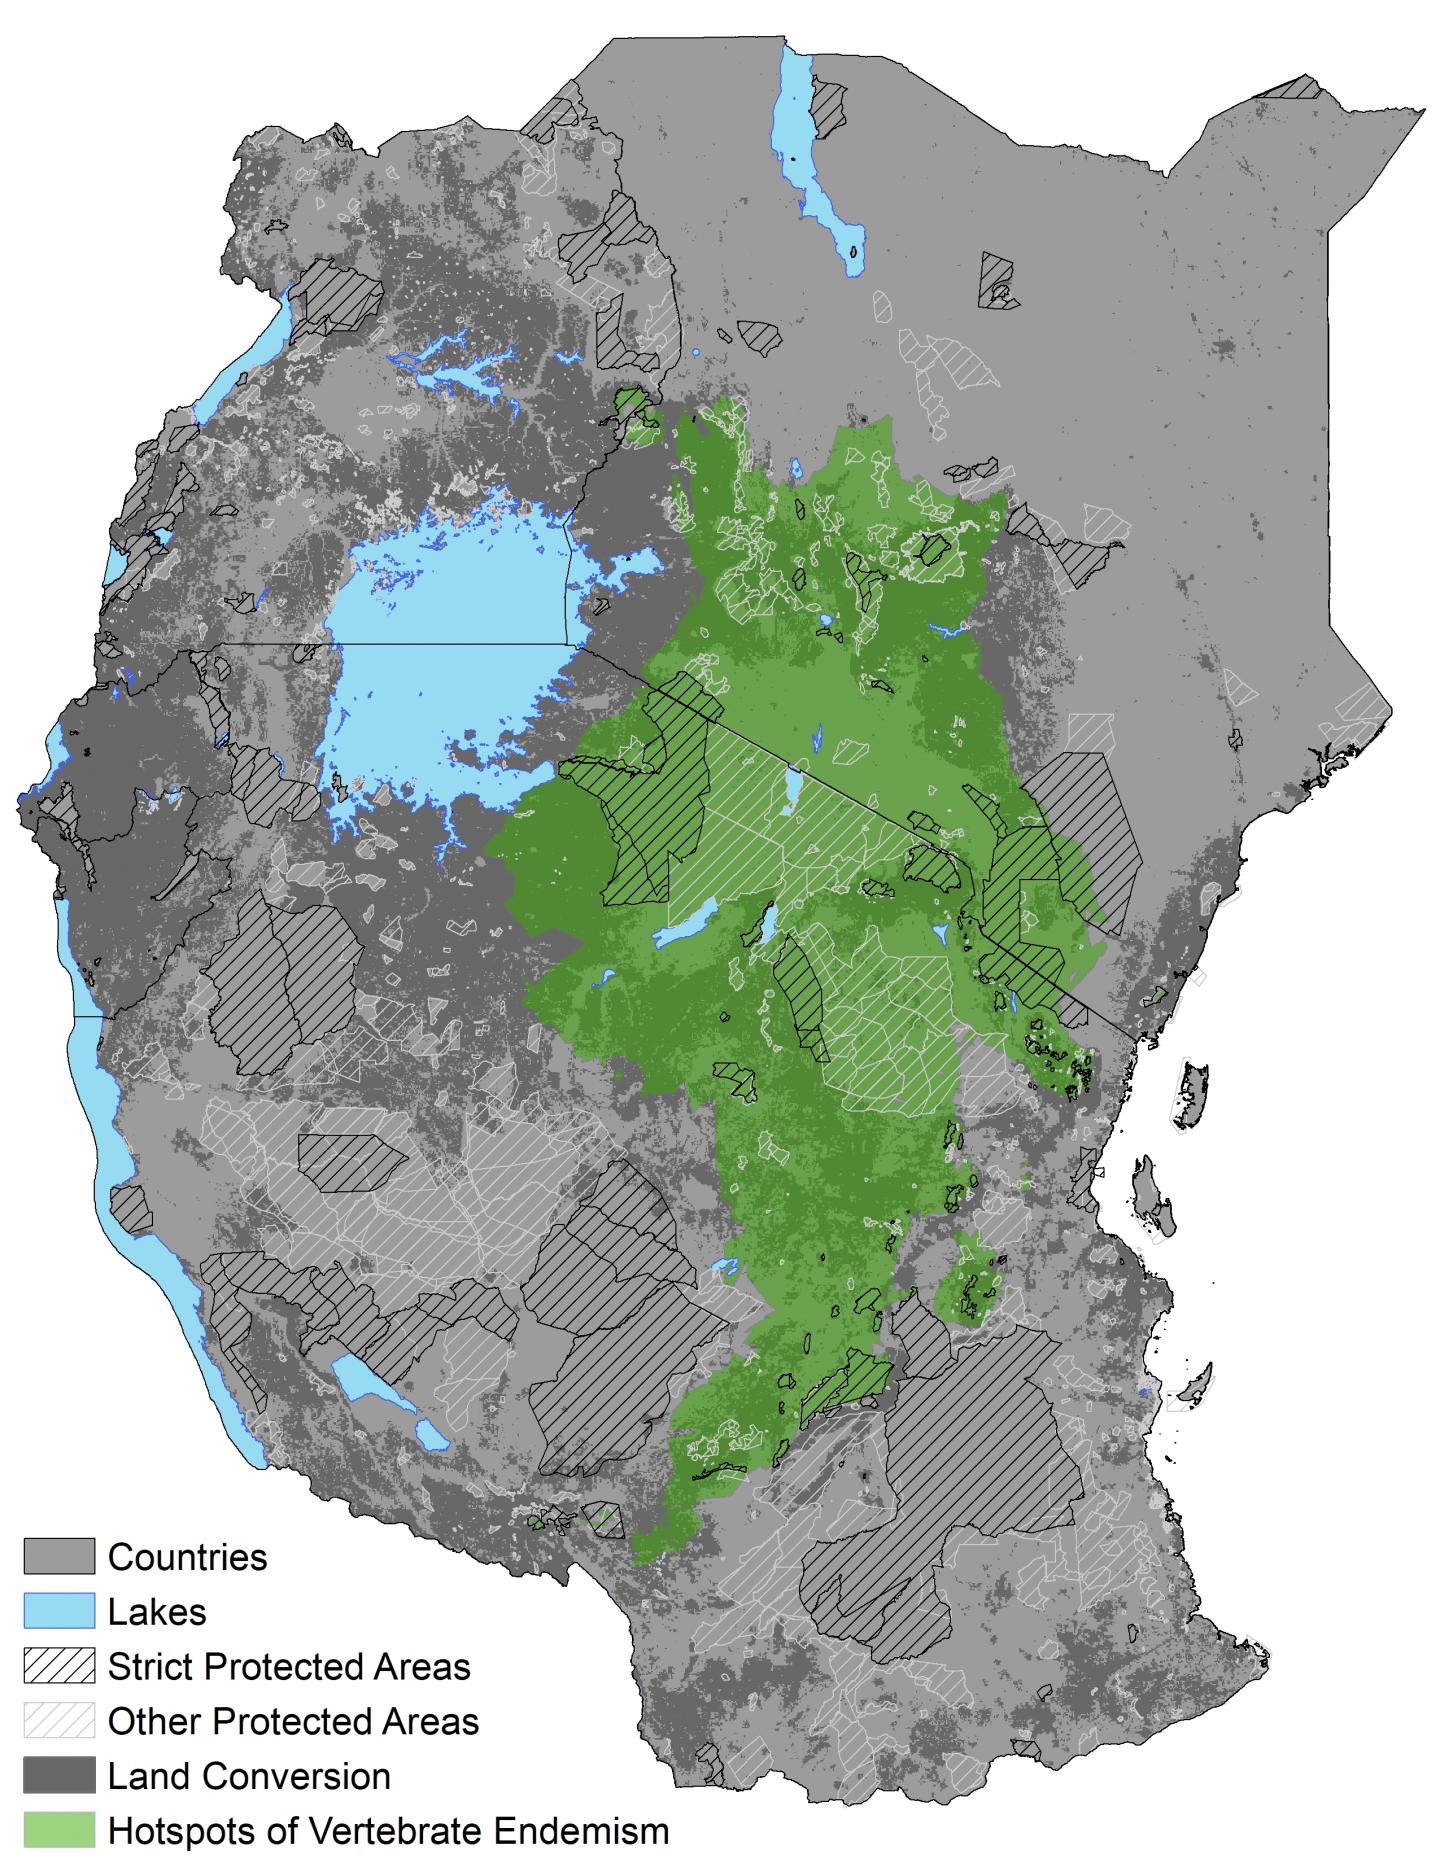 Measuring the Success of East African Protected Areas